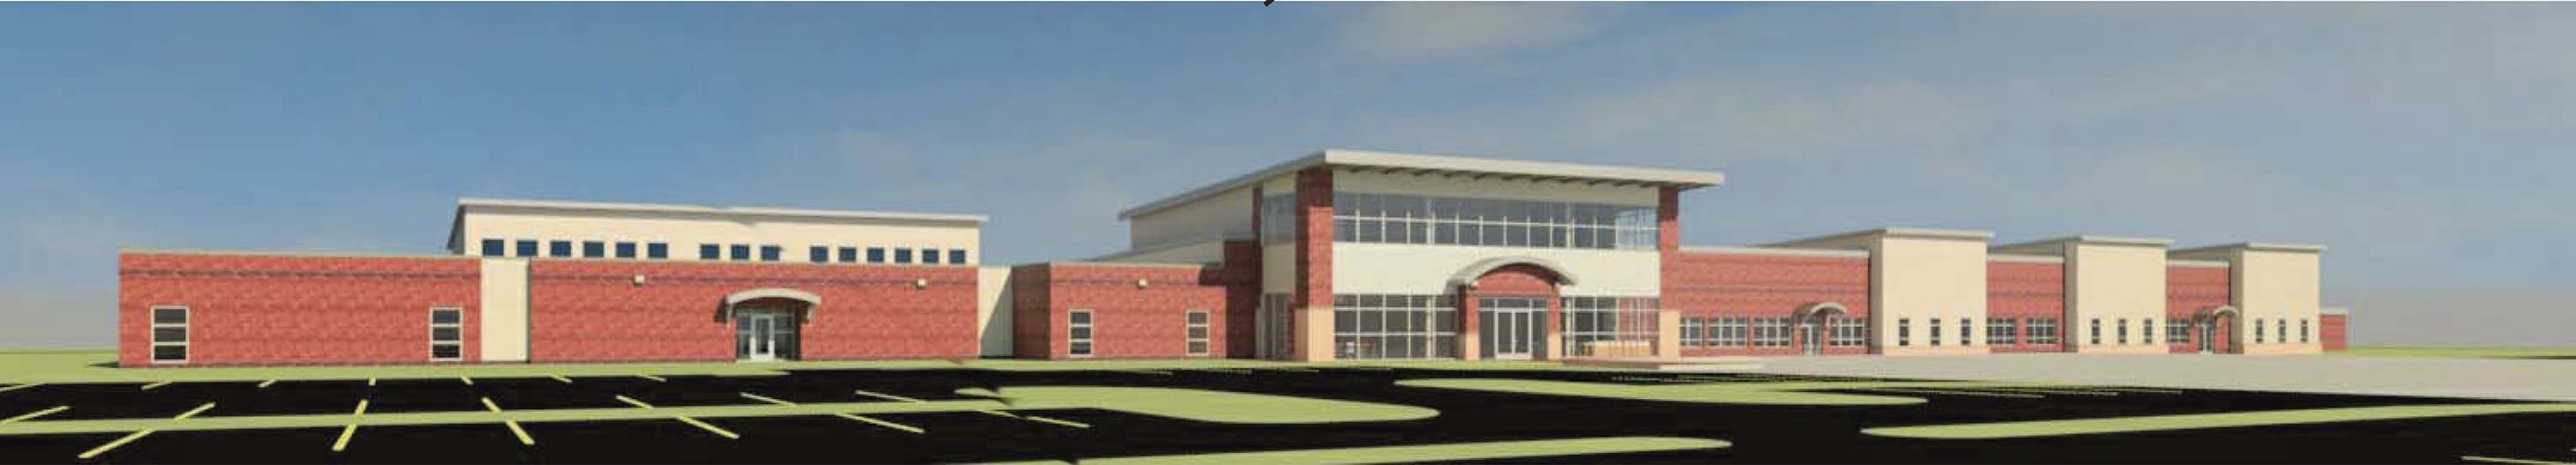 Artist rendering of the renovated Morgan Diesel and Automotive Complex at South Georgia Technical College.